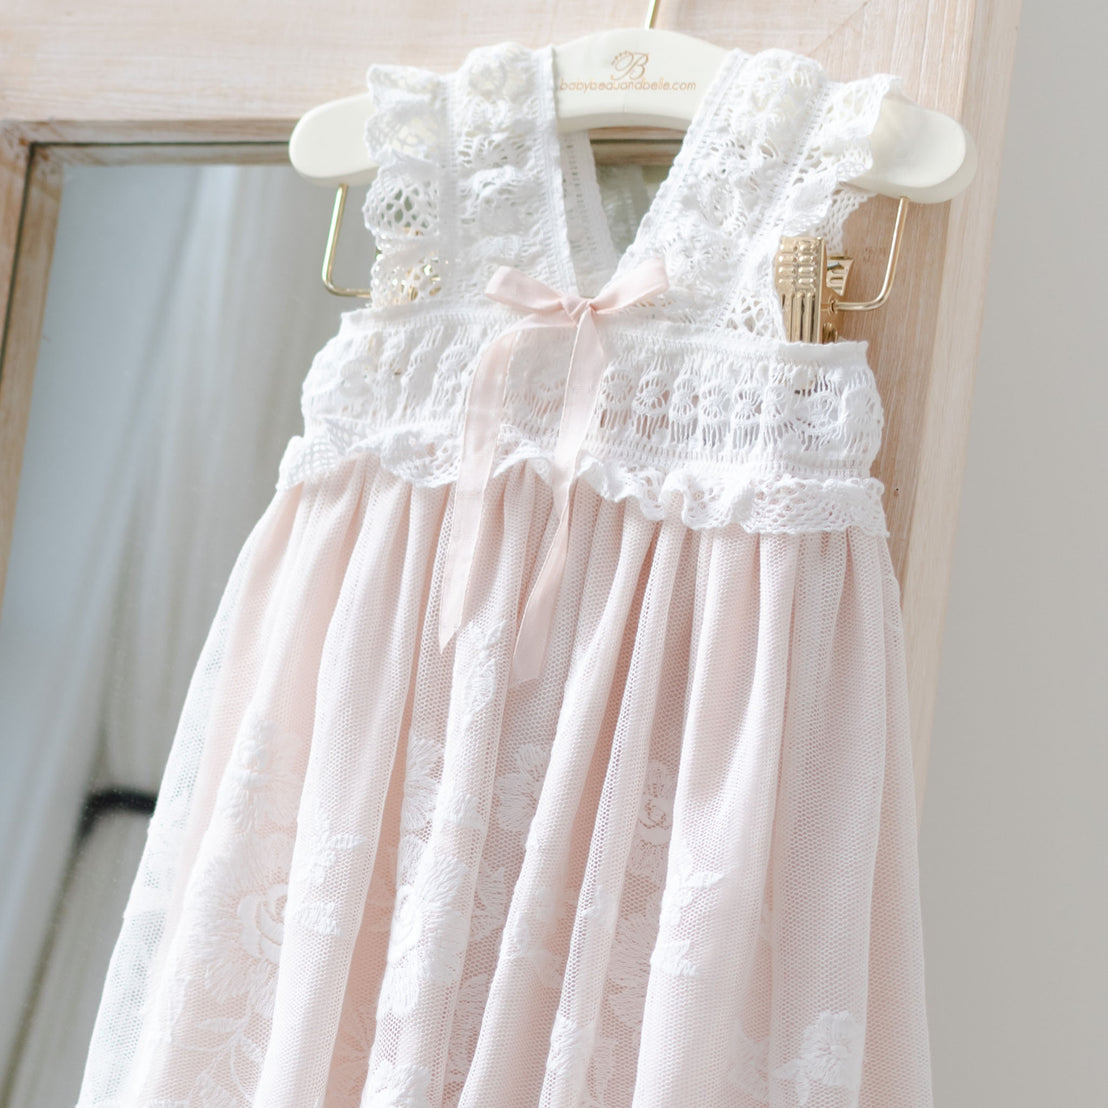 An elegant pink Charlotte Christening Gown & Bonnet for a little girl, featuring delicate cotton lace detailing and a satin ribbon at the chest, hanging on a wooden hanger against a soft background.